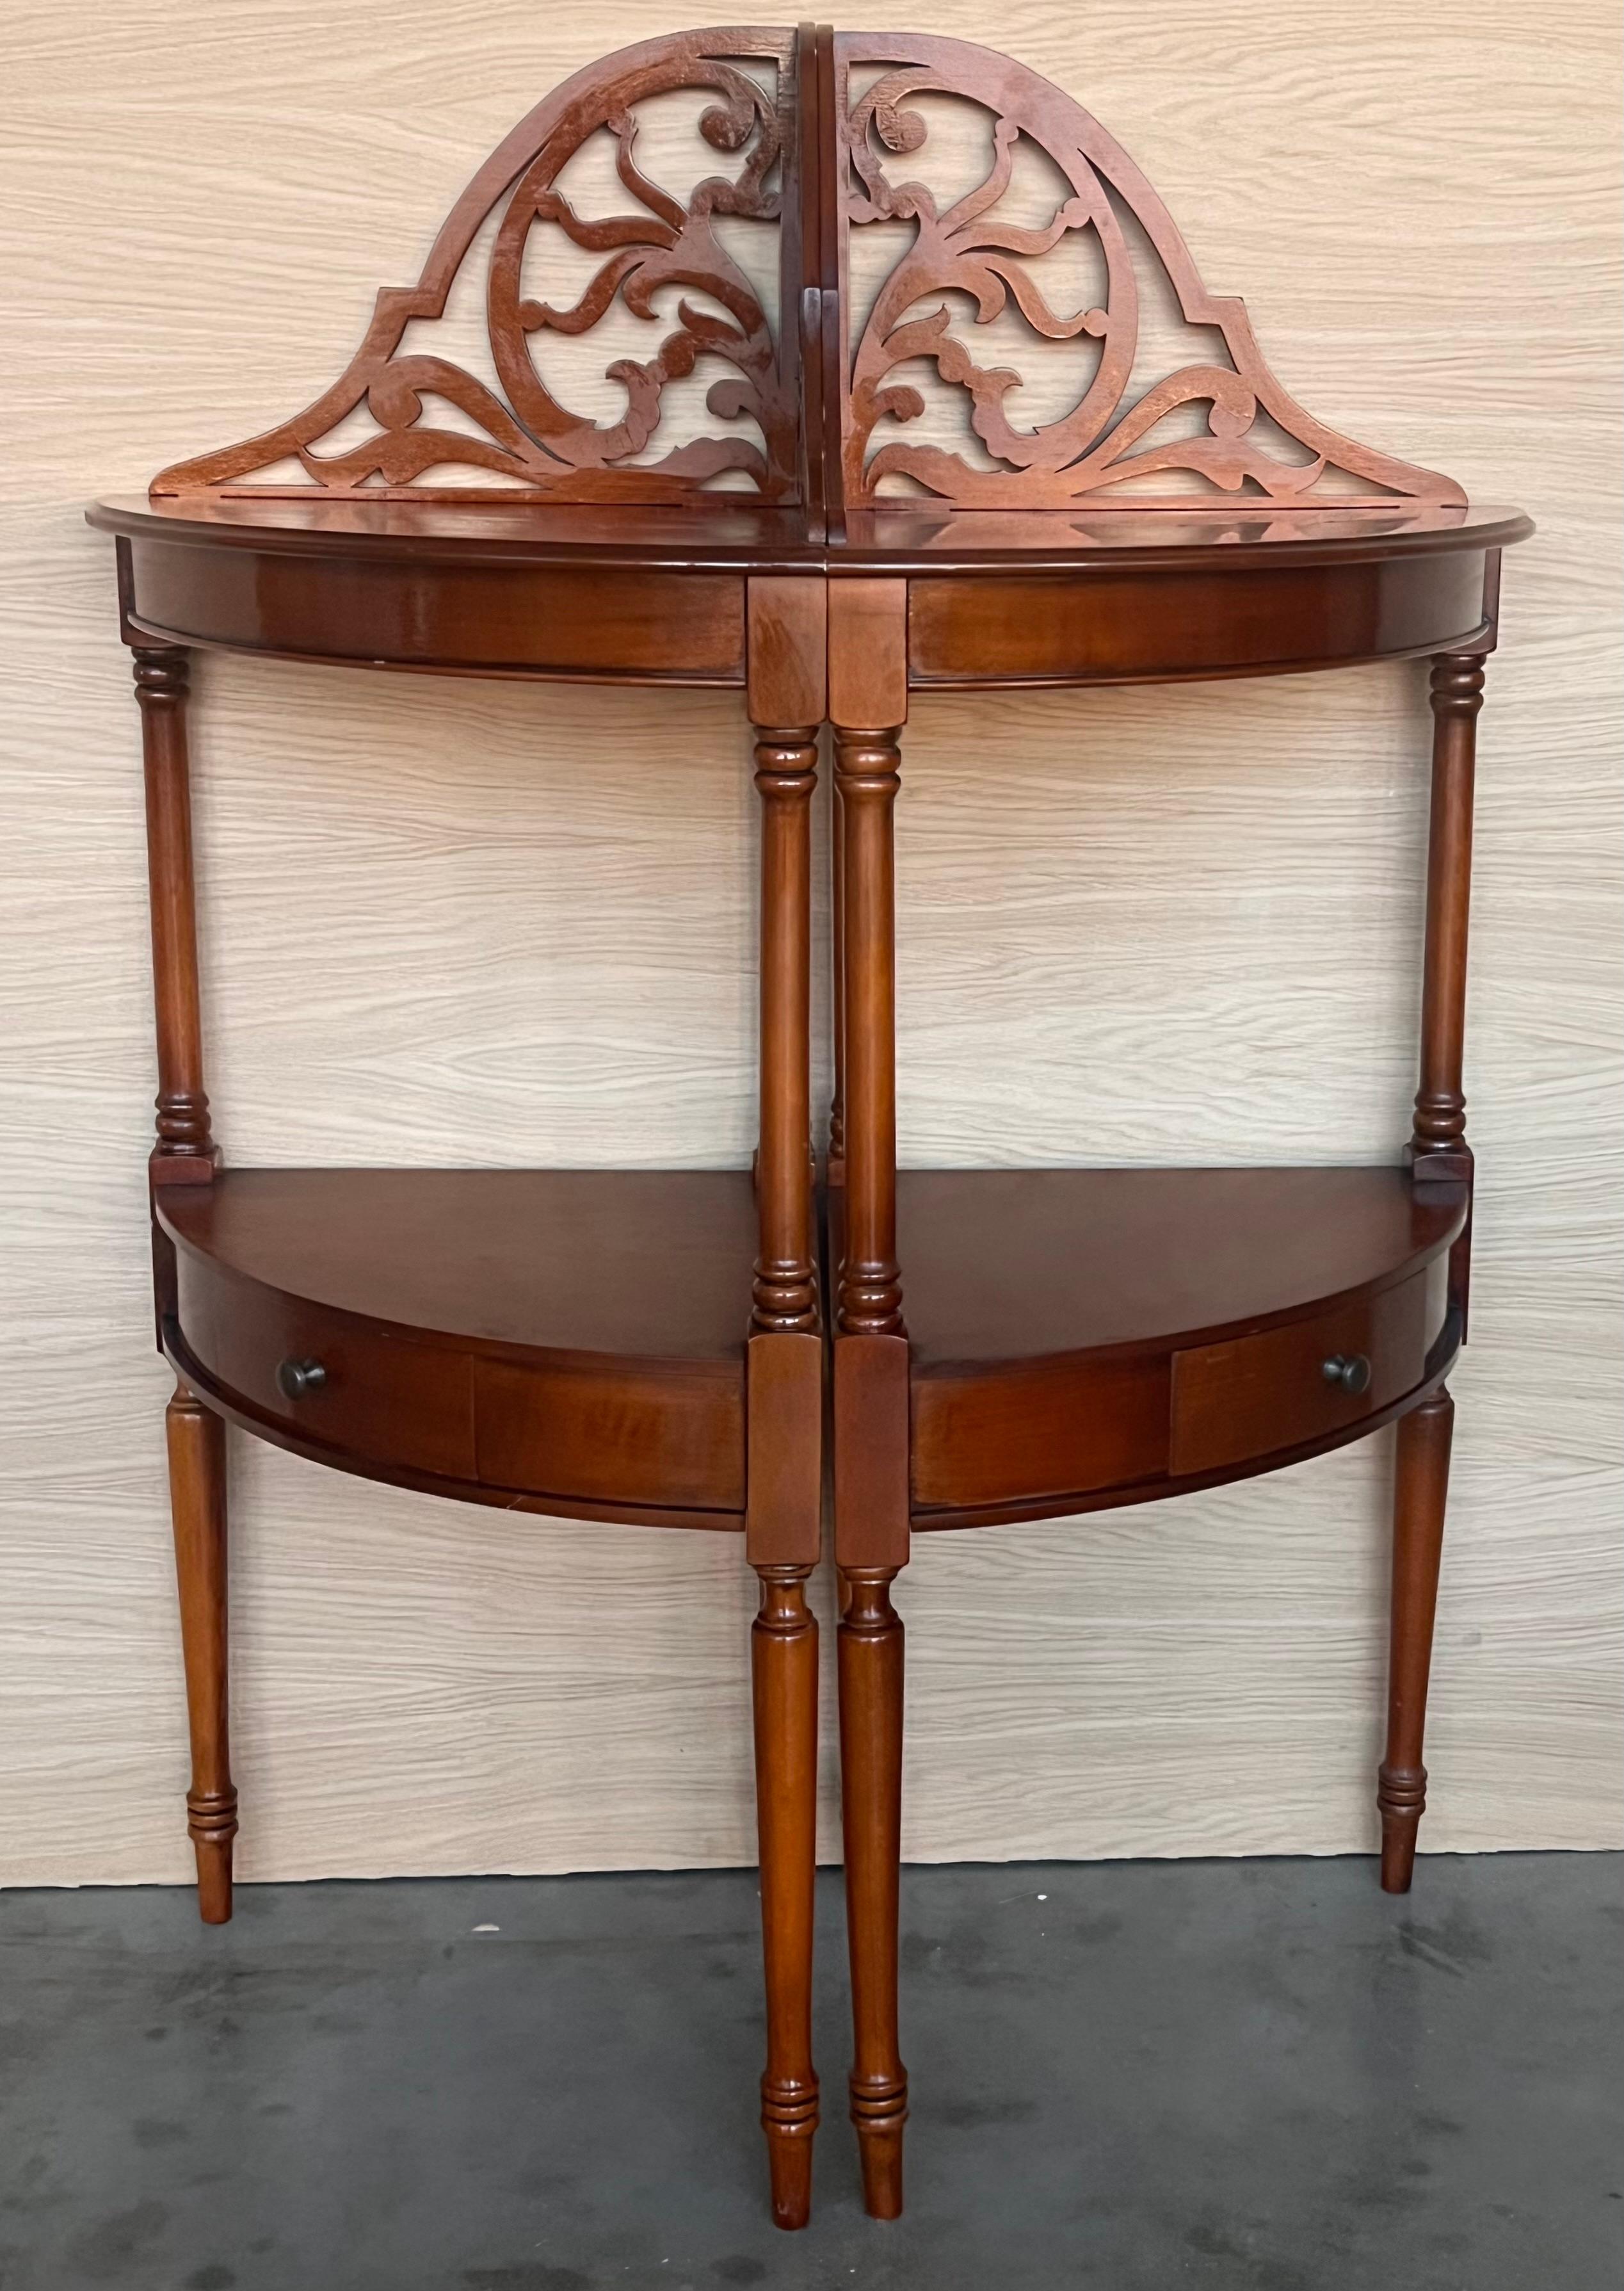 An early 20th century two-tier Art Nouveau corner shelf with one drawer